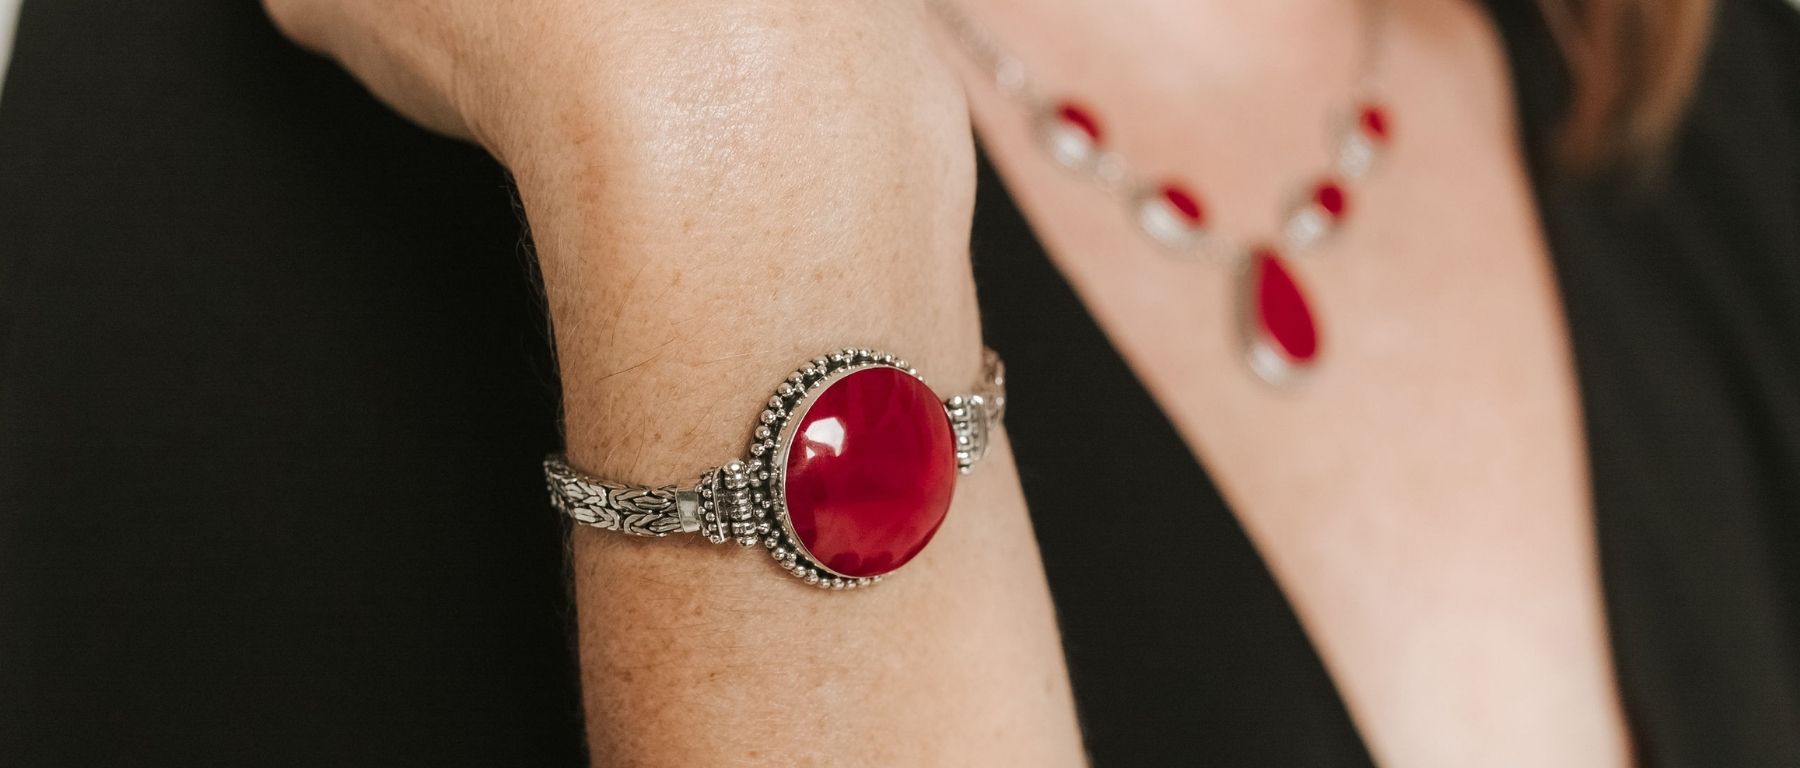 ♦️ (𝗥𝗲𝗱 𝗖𝗼𝗿𝗮𝗹 𝗦𝘁𝗼𝗻𝗲 𝗥𝗶𝗻𝗴) ♦️ | Coral stone ring, Red  coral, Coral stone